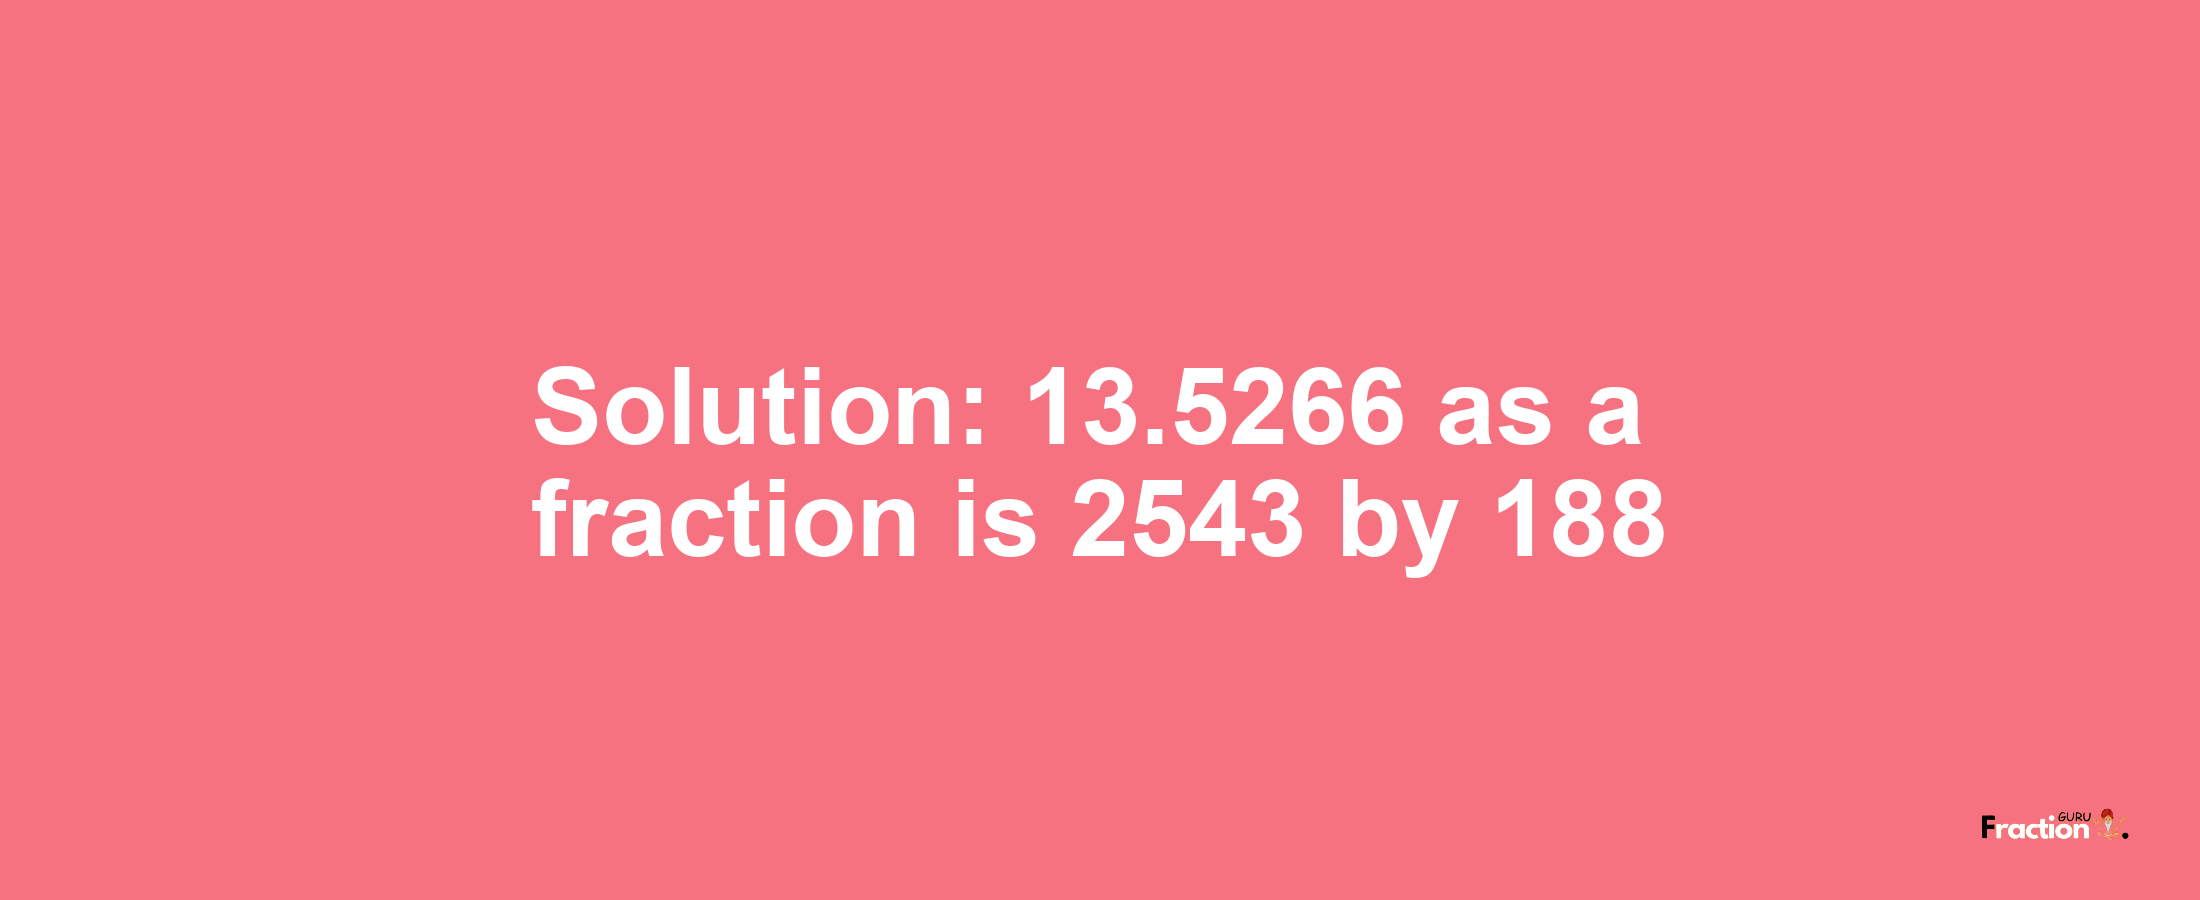 Solution:13.5266 as a fraction is 2543/188